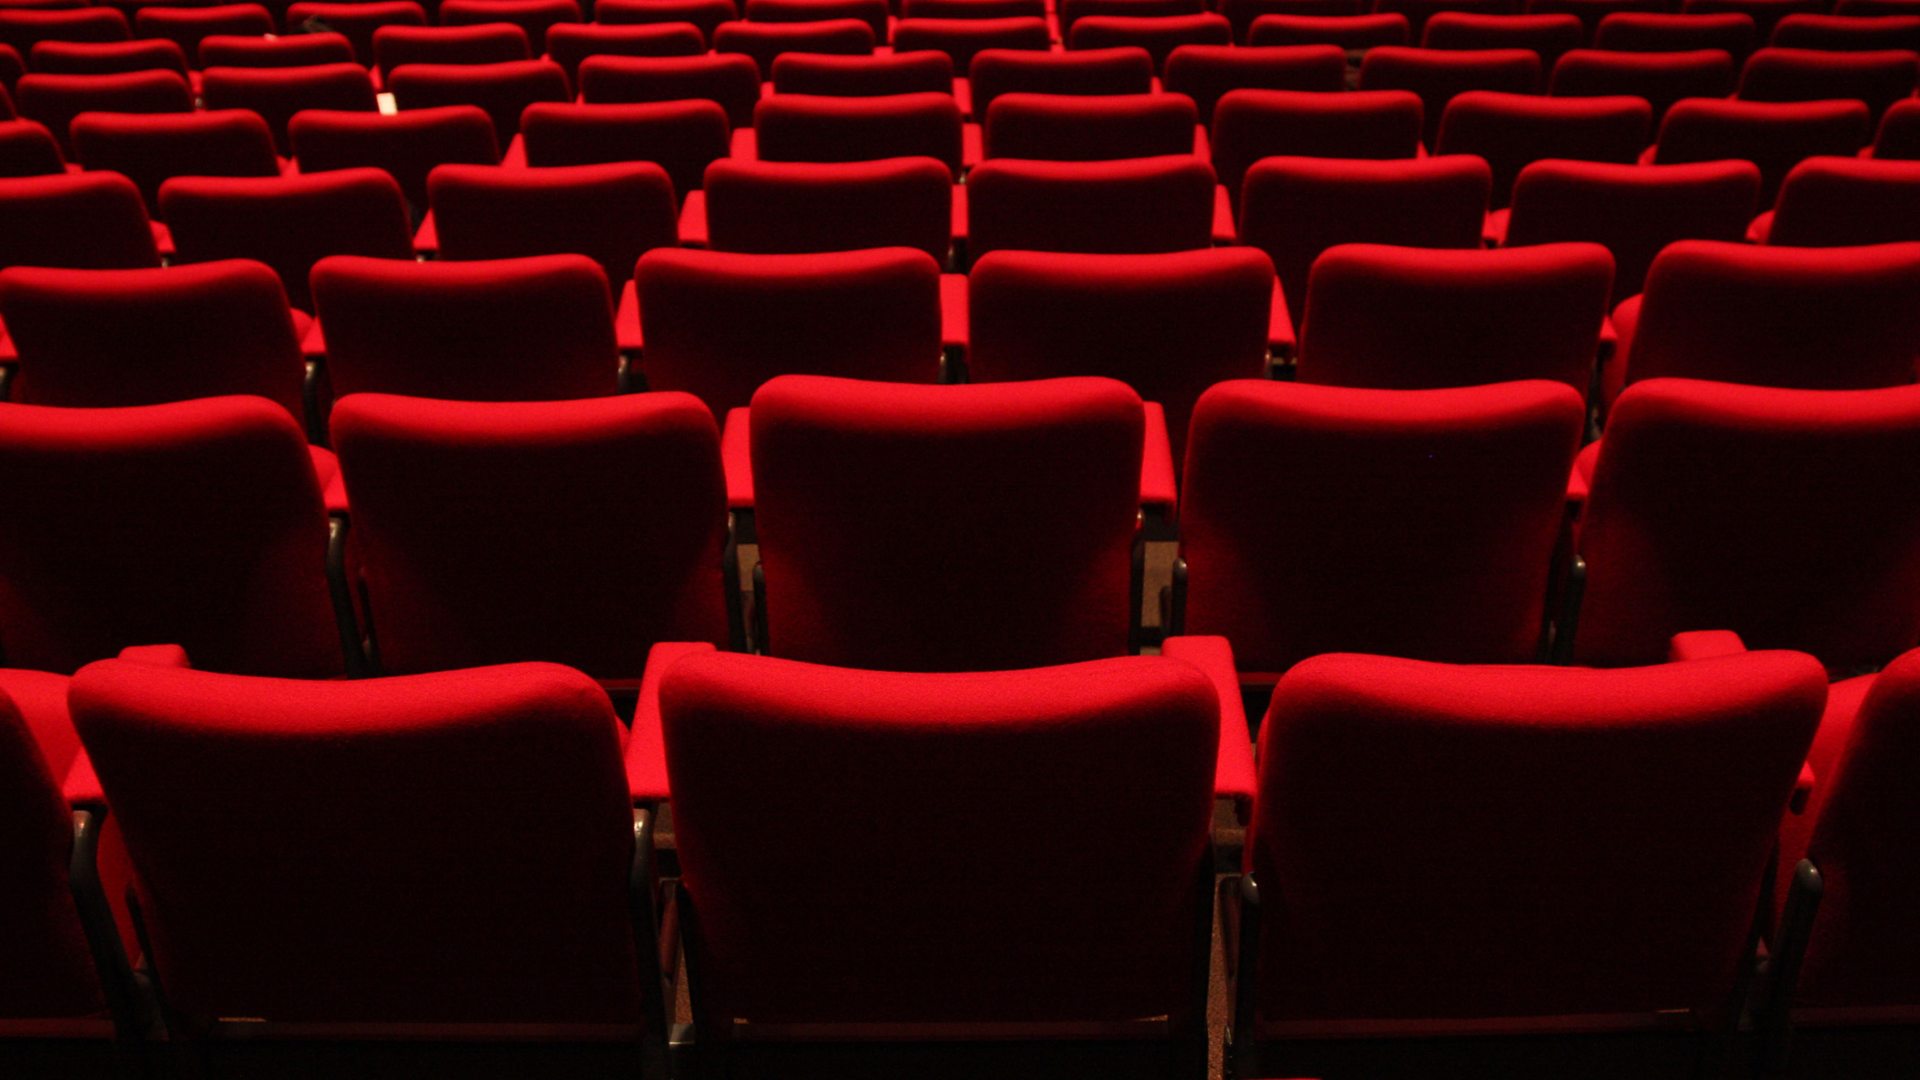 Theater seating. Theater Seats. Seats at the Theatre. Audience Seating. Cheaper Seats in Theatre.